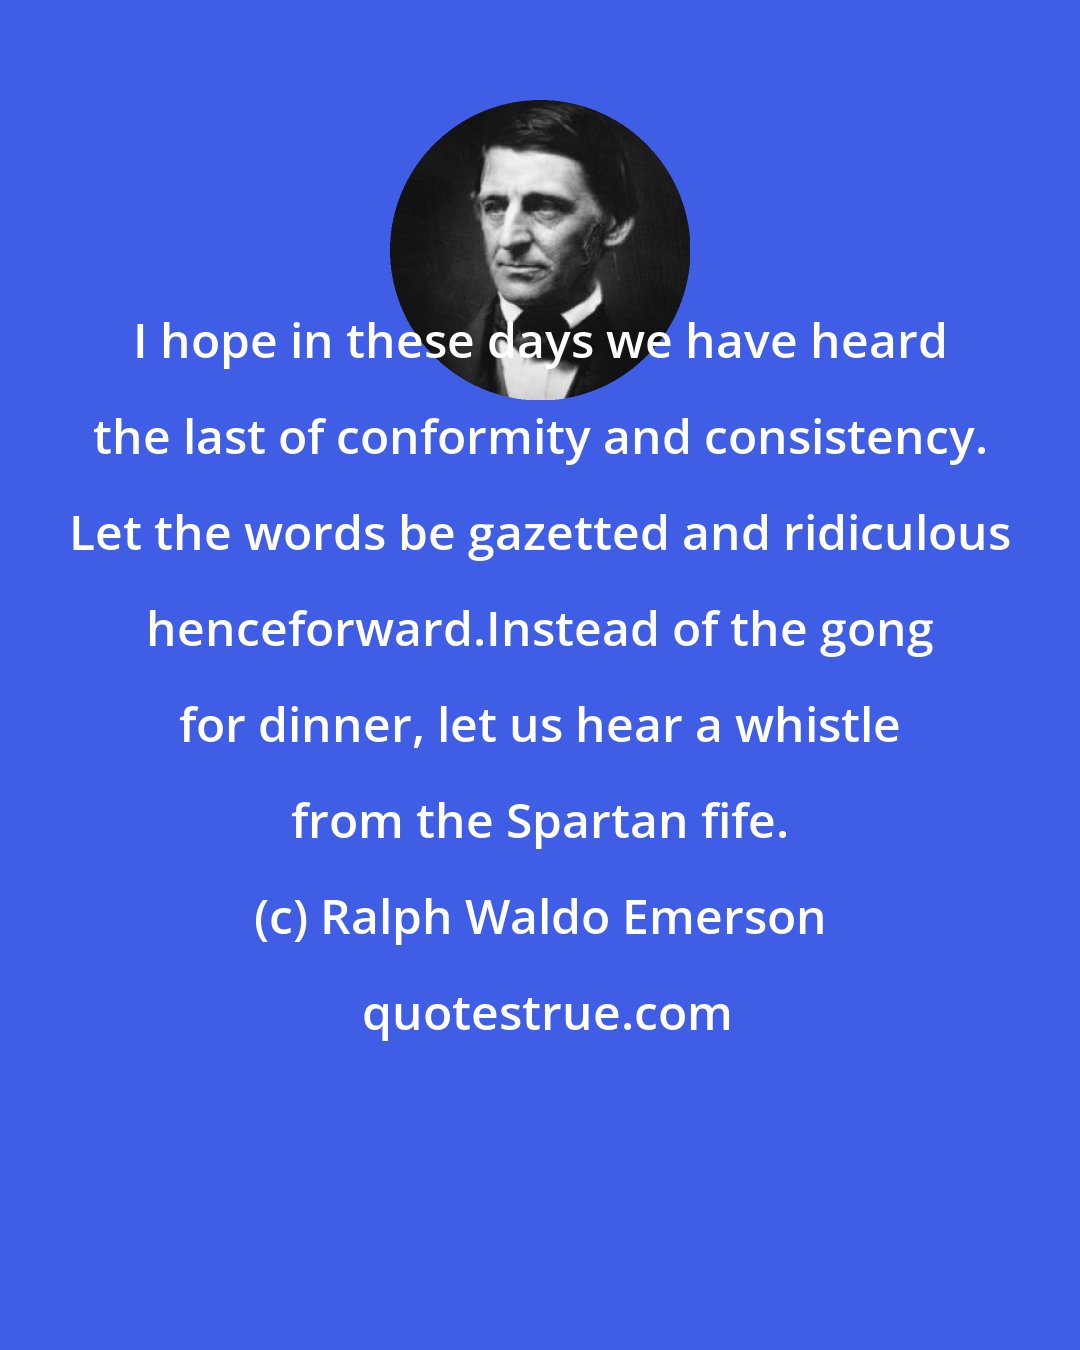 Ralph Waldo Emerson: I hope in these days we have heard the last of conformity and consistency. Let the words be gazetted and ridiculous henceforward.Instead of the gong for dinner, let us hear a whistle from the Spartan fife.